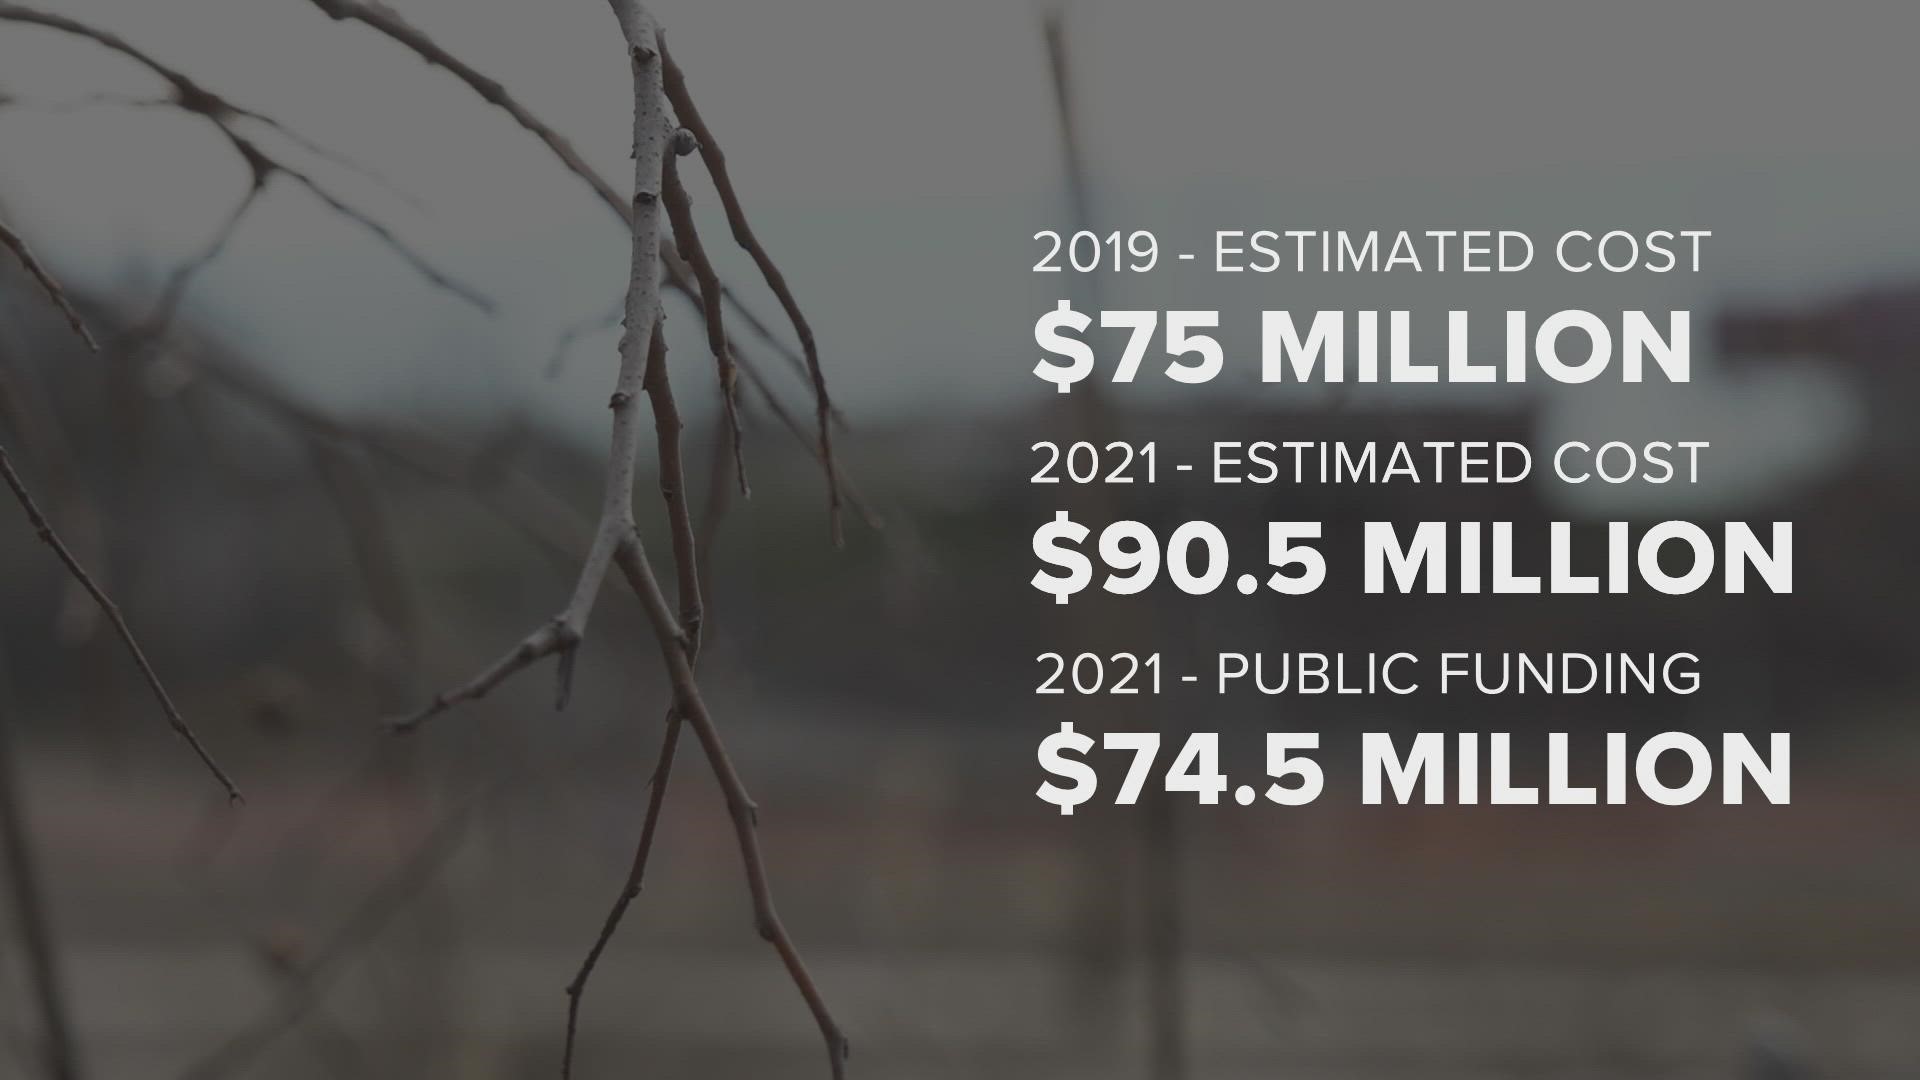 When Randy Boyd first proposed the project, developers estimated it would cost $75 million. Now, it is around $90.5 million — mostly funded by the public.